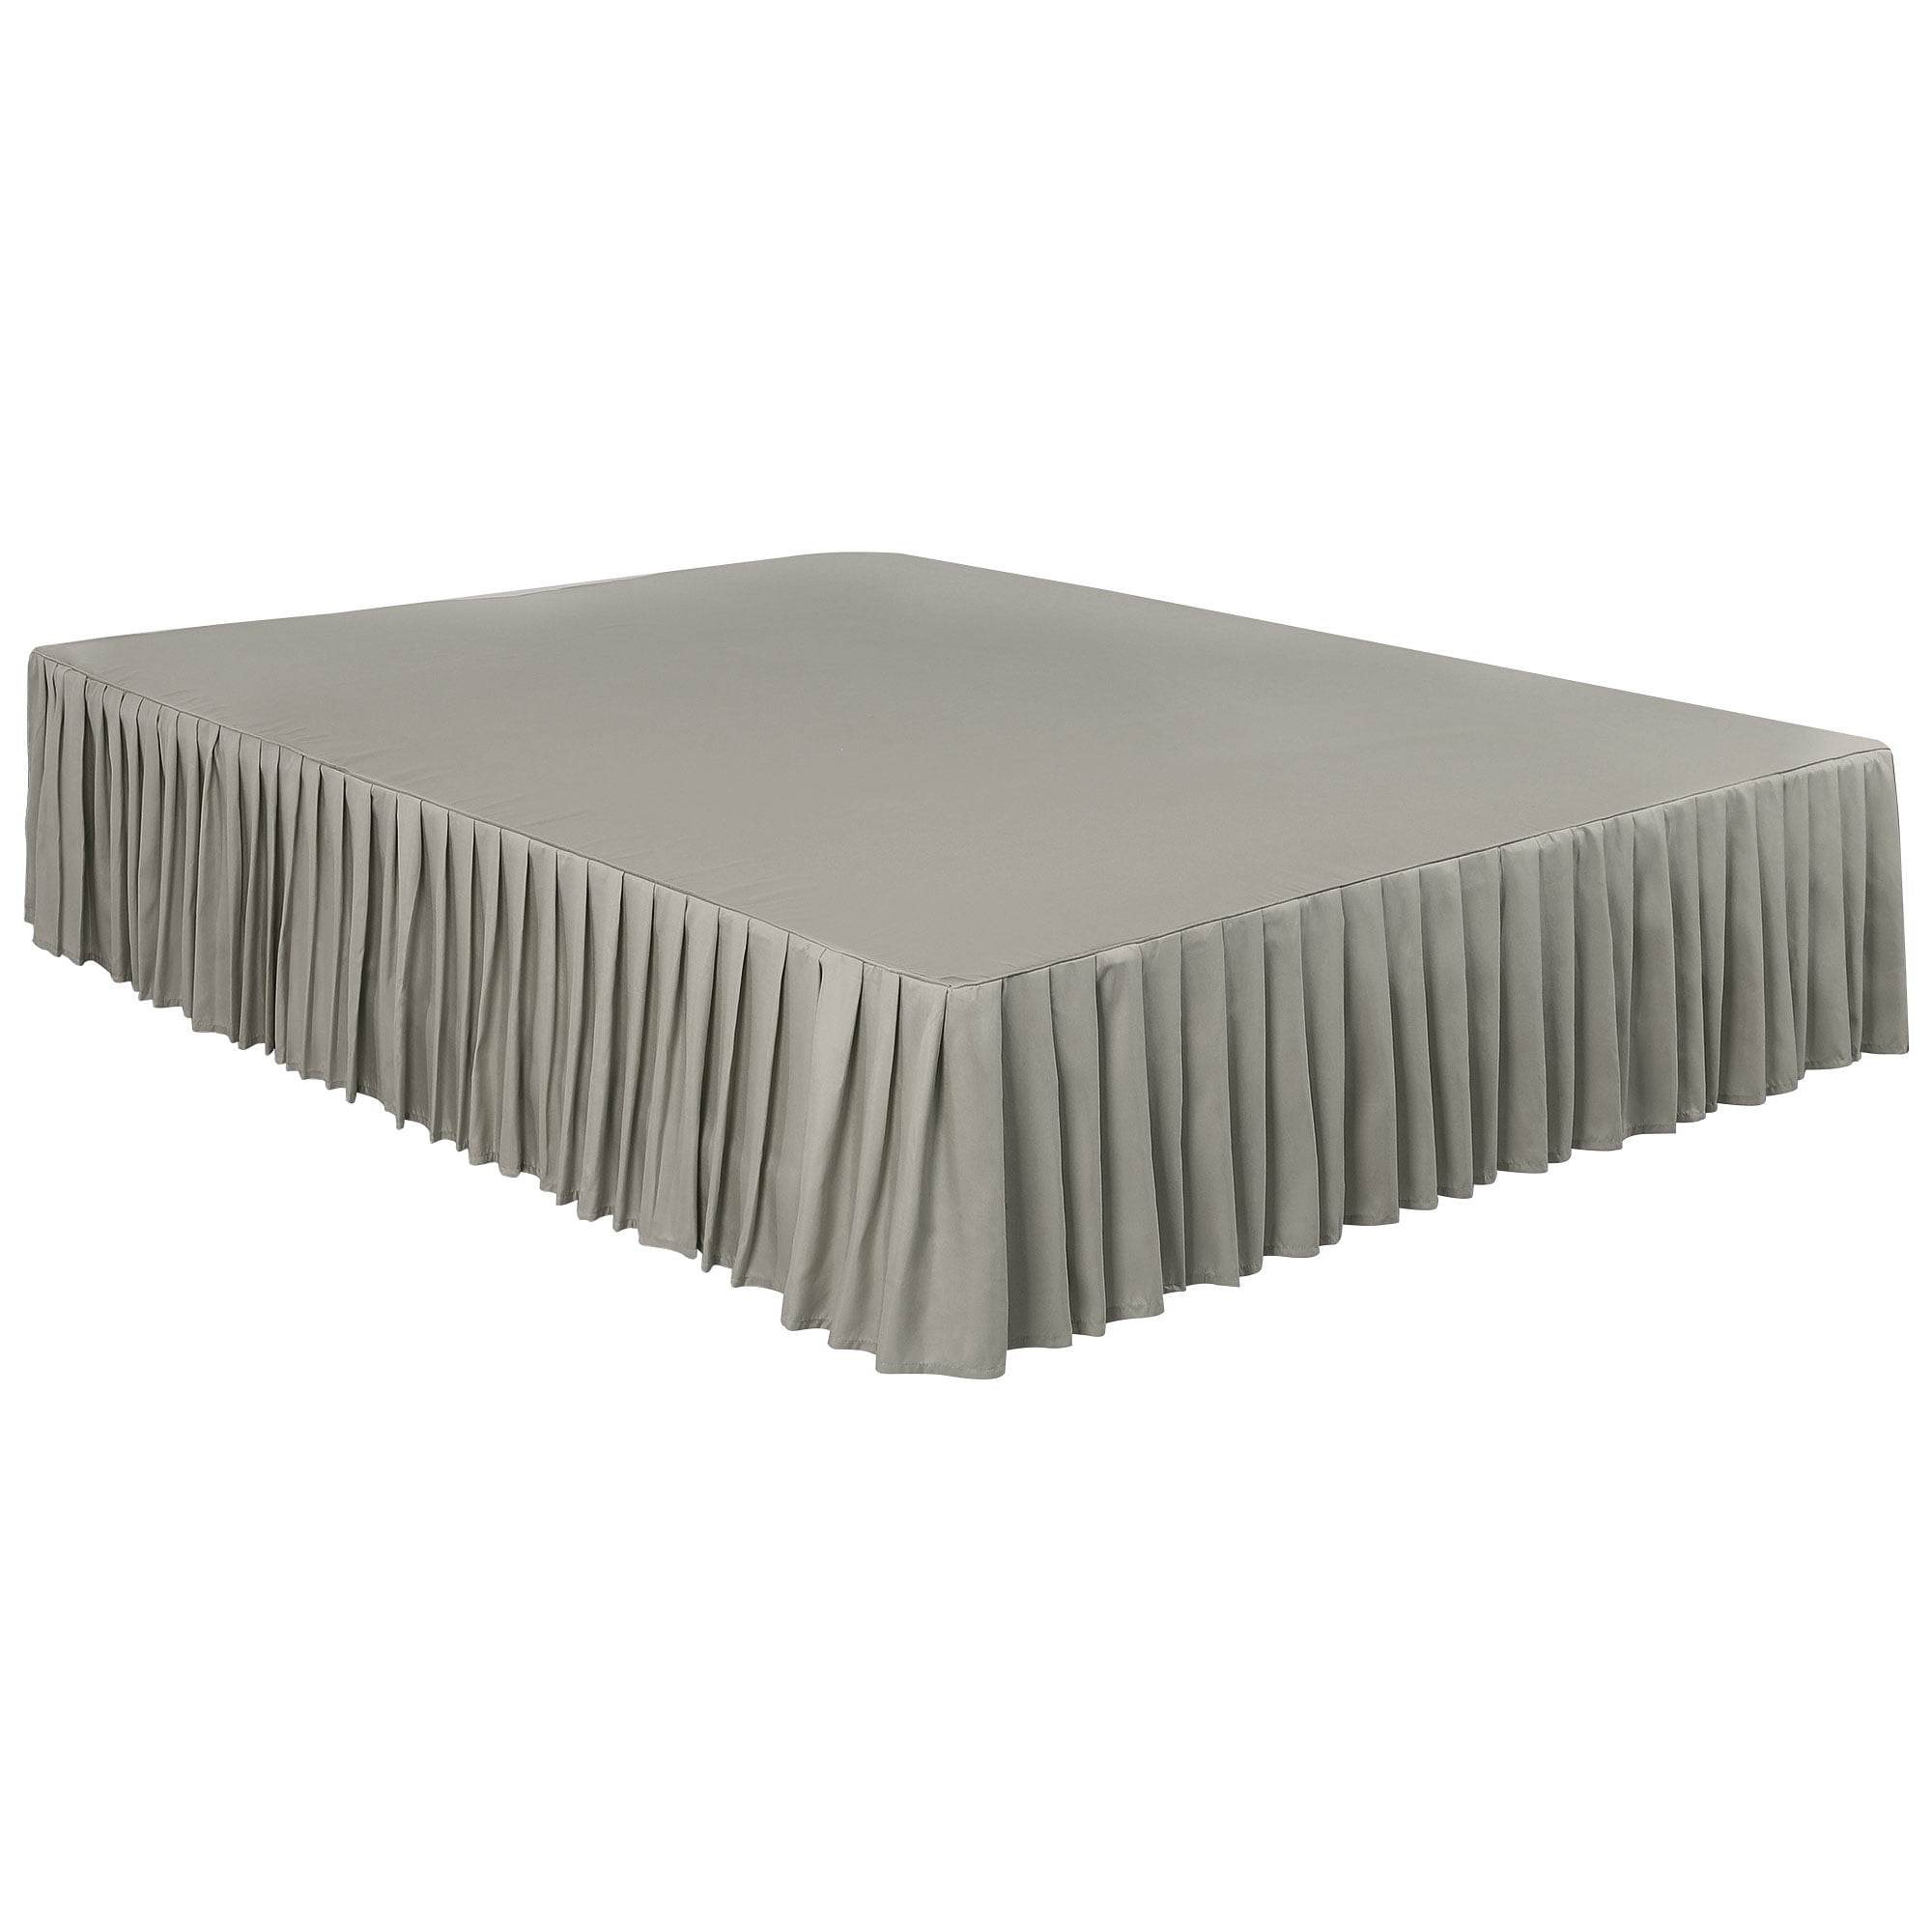 Details about   Dust Ruffle Bed Skirt Cotton Bed Wrap with Platform Fit Gathered Style Sage 